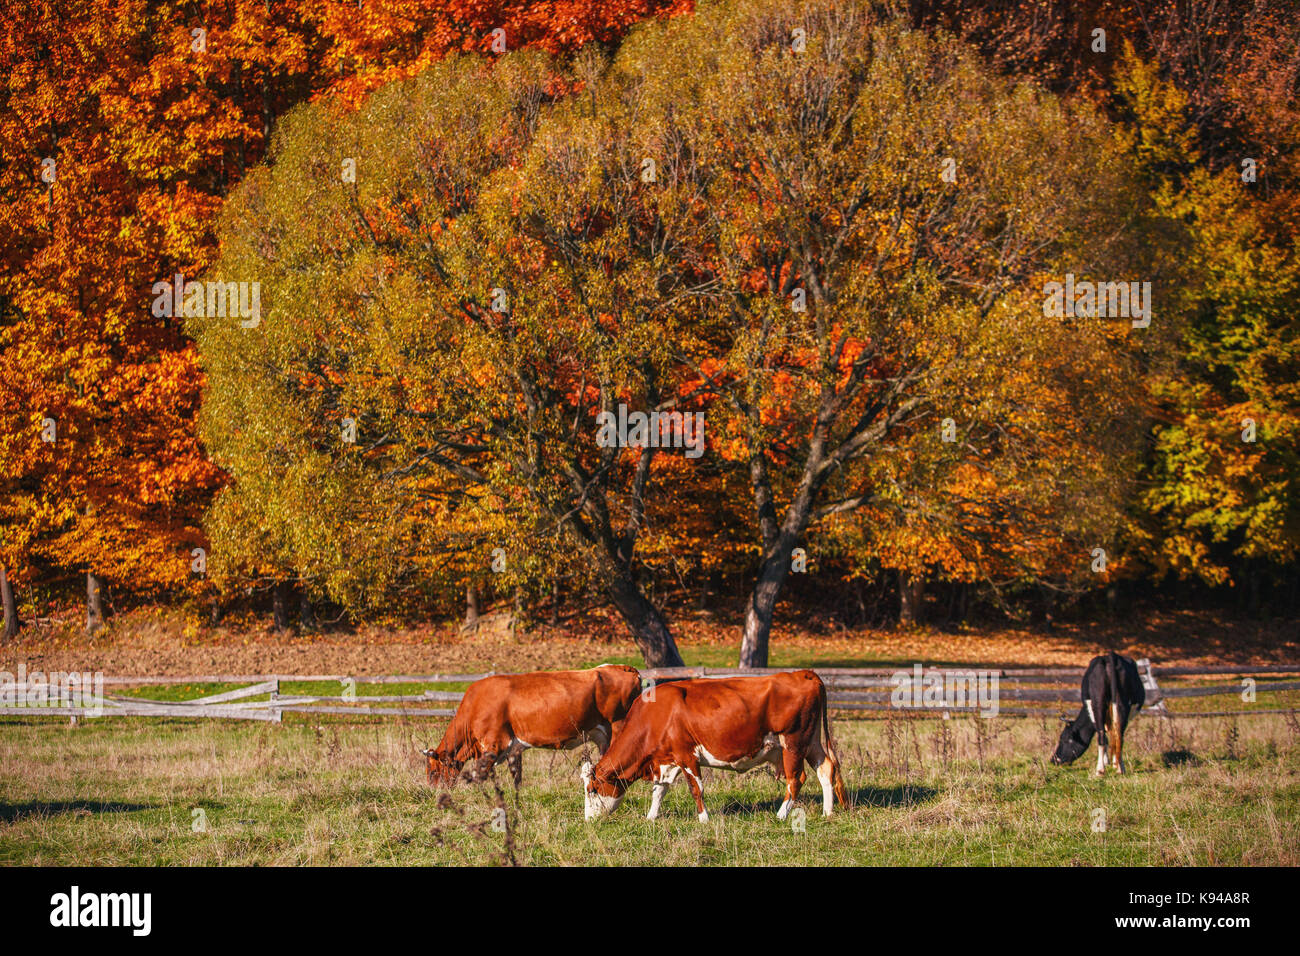 Cows graze on the outskirts of the autumn forest. Stock Photo